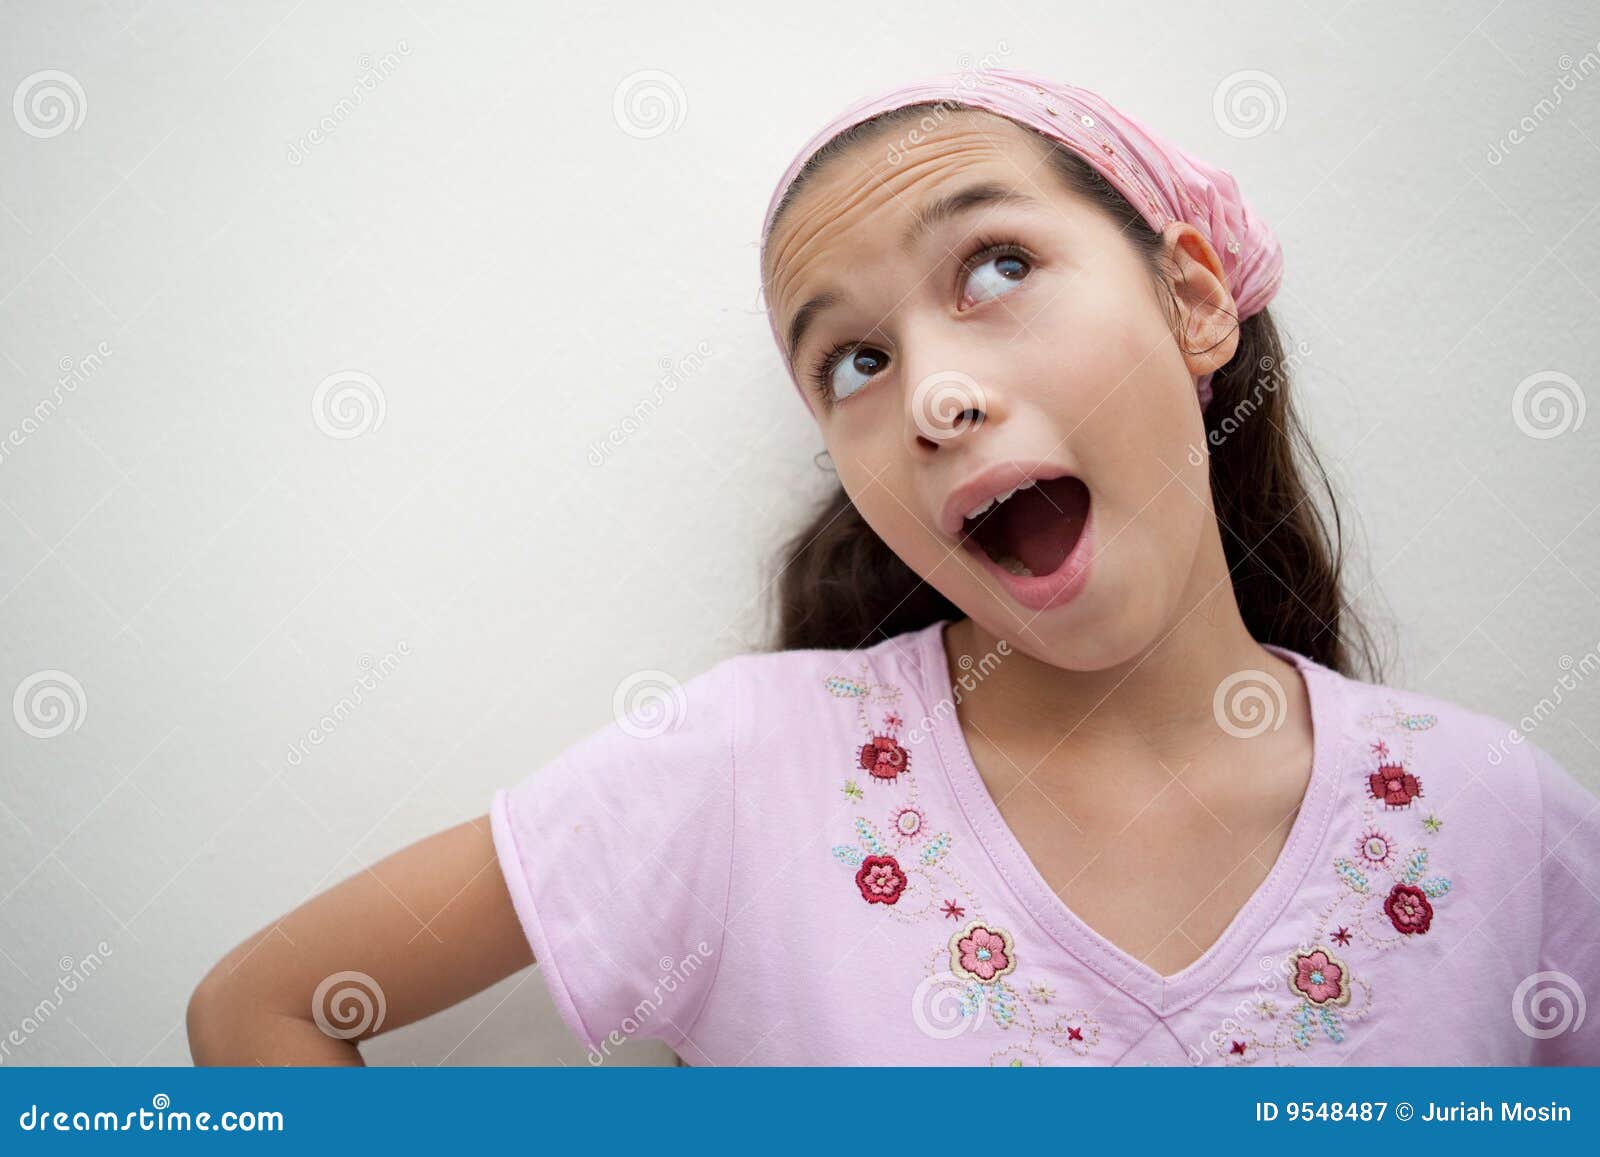 Young Girl With Mouth Open Royalty Free Stock Photography Image 9548